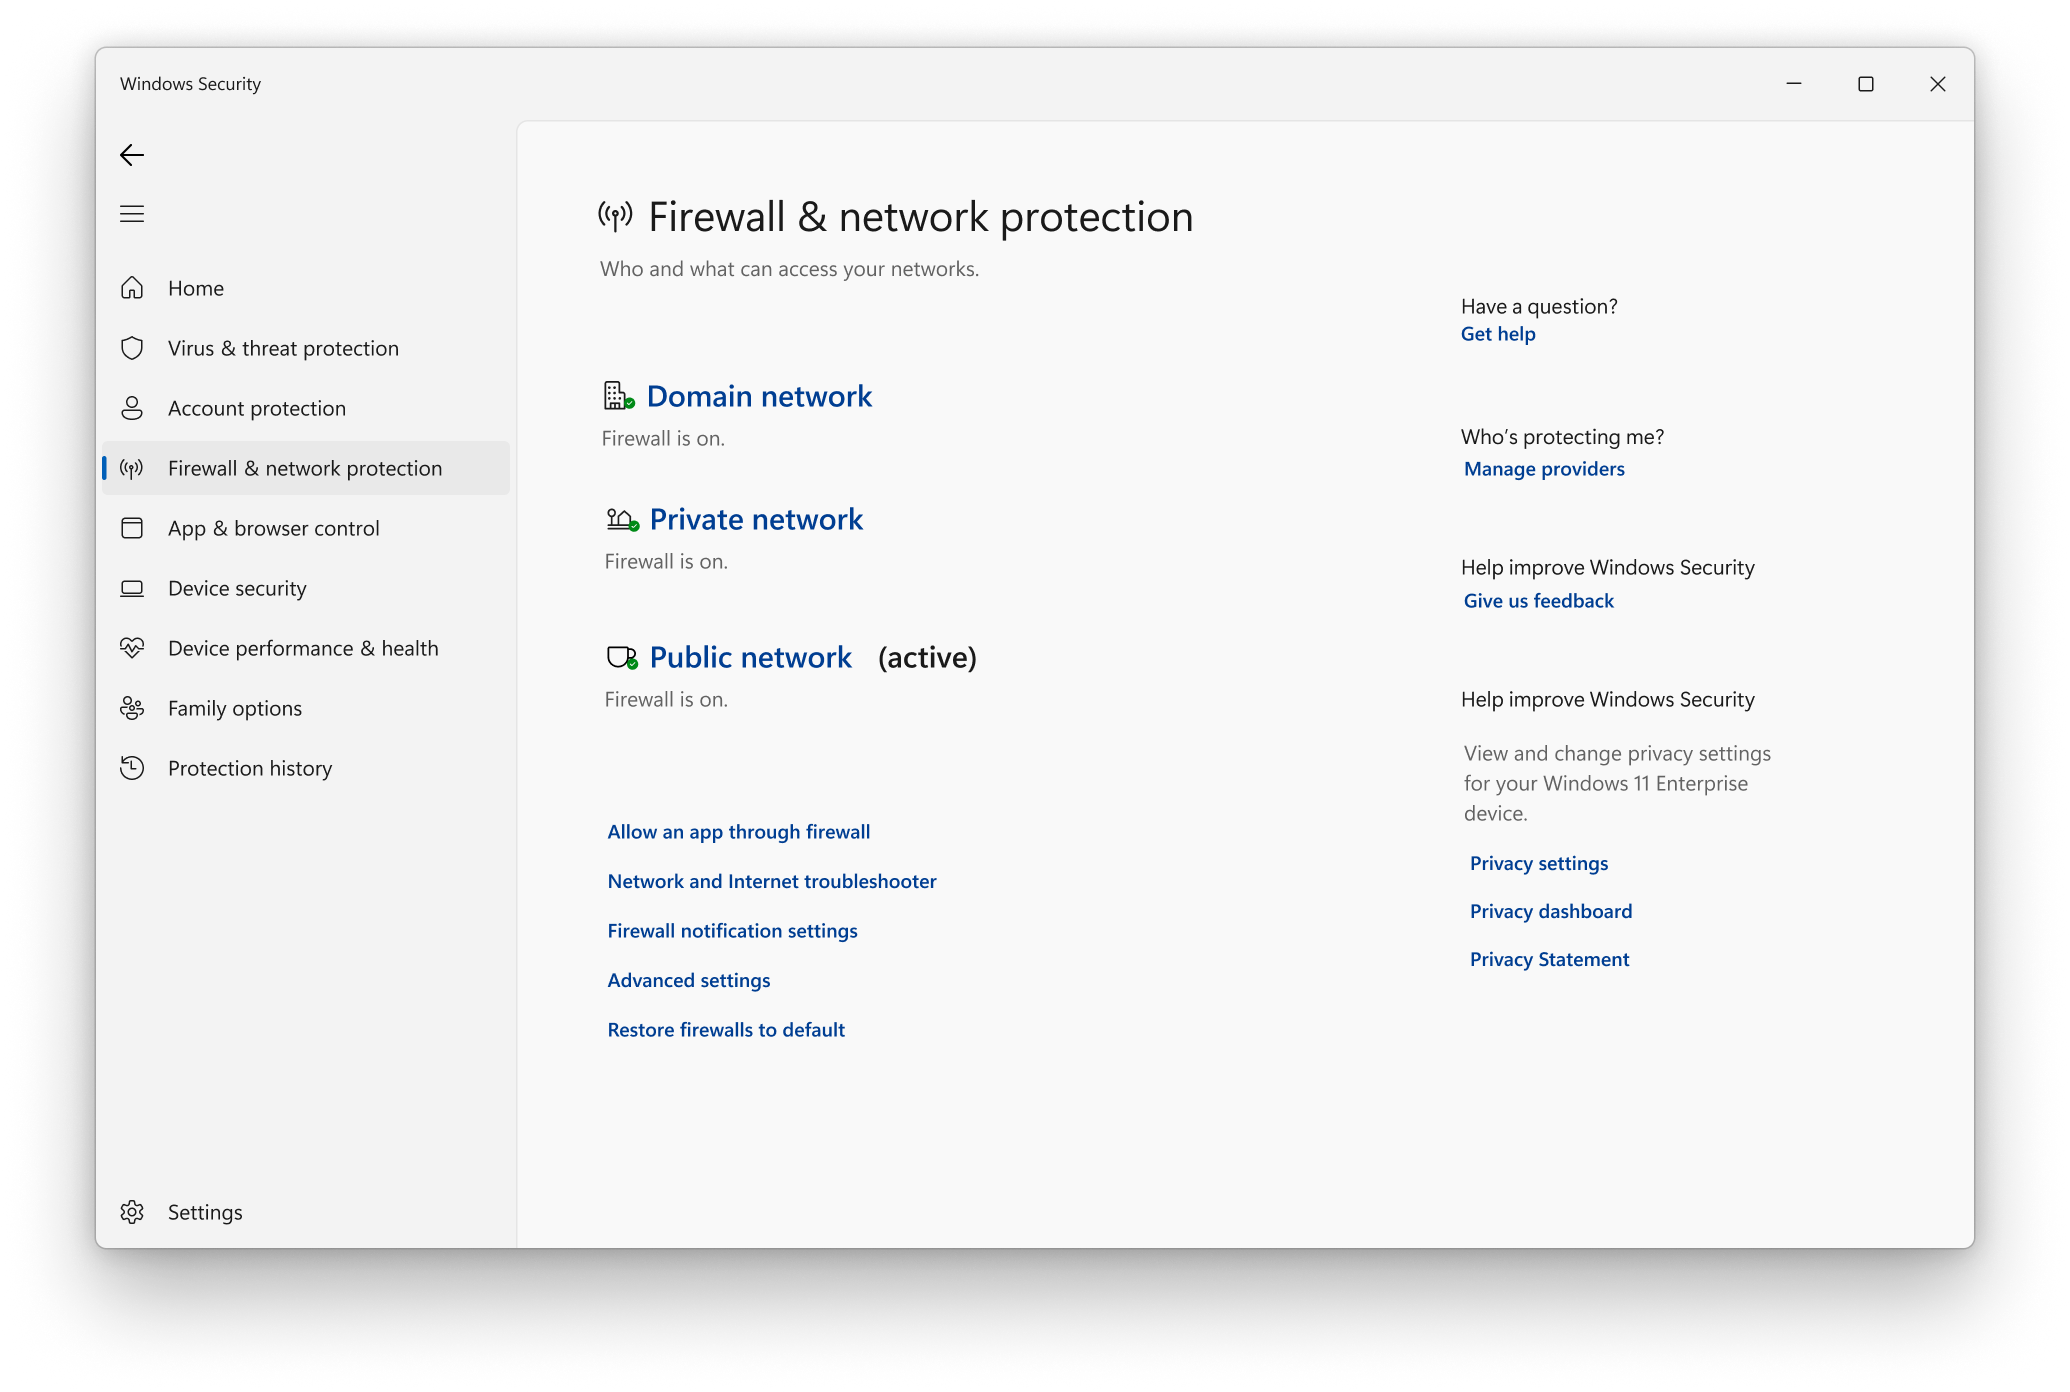 Firewall settings and authentication settings